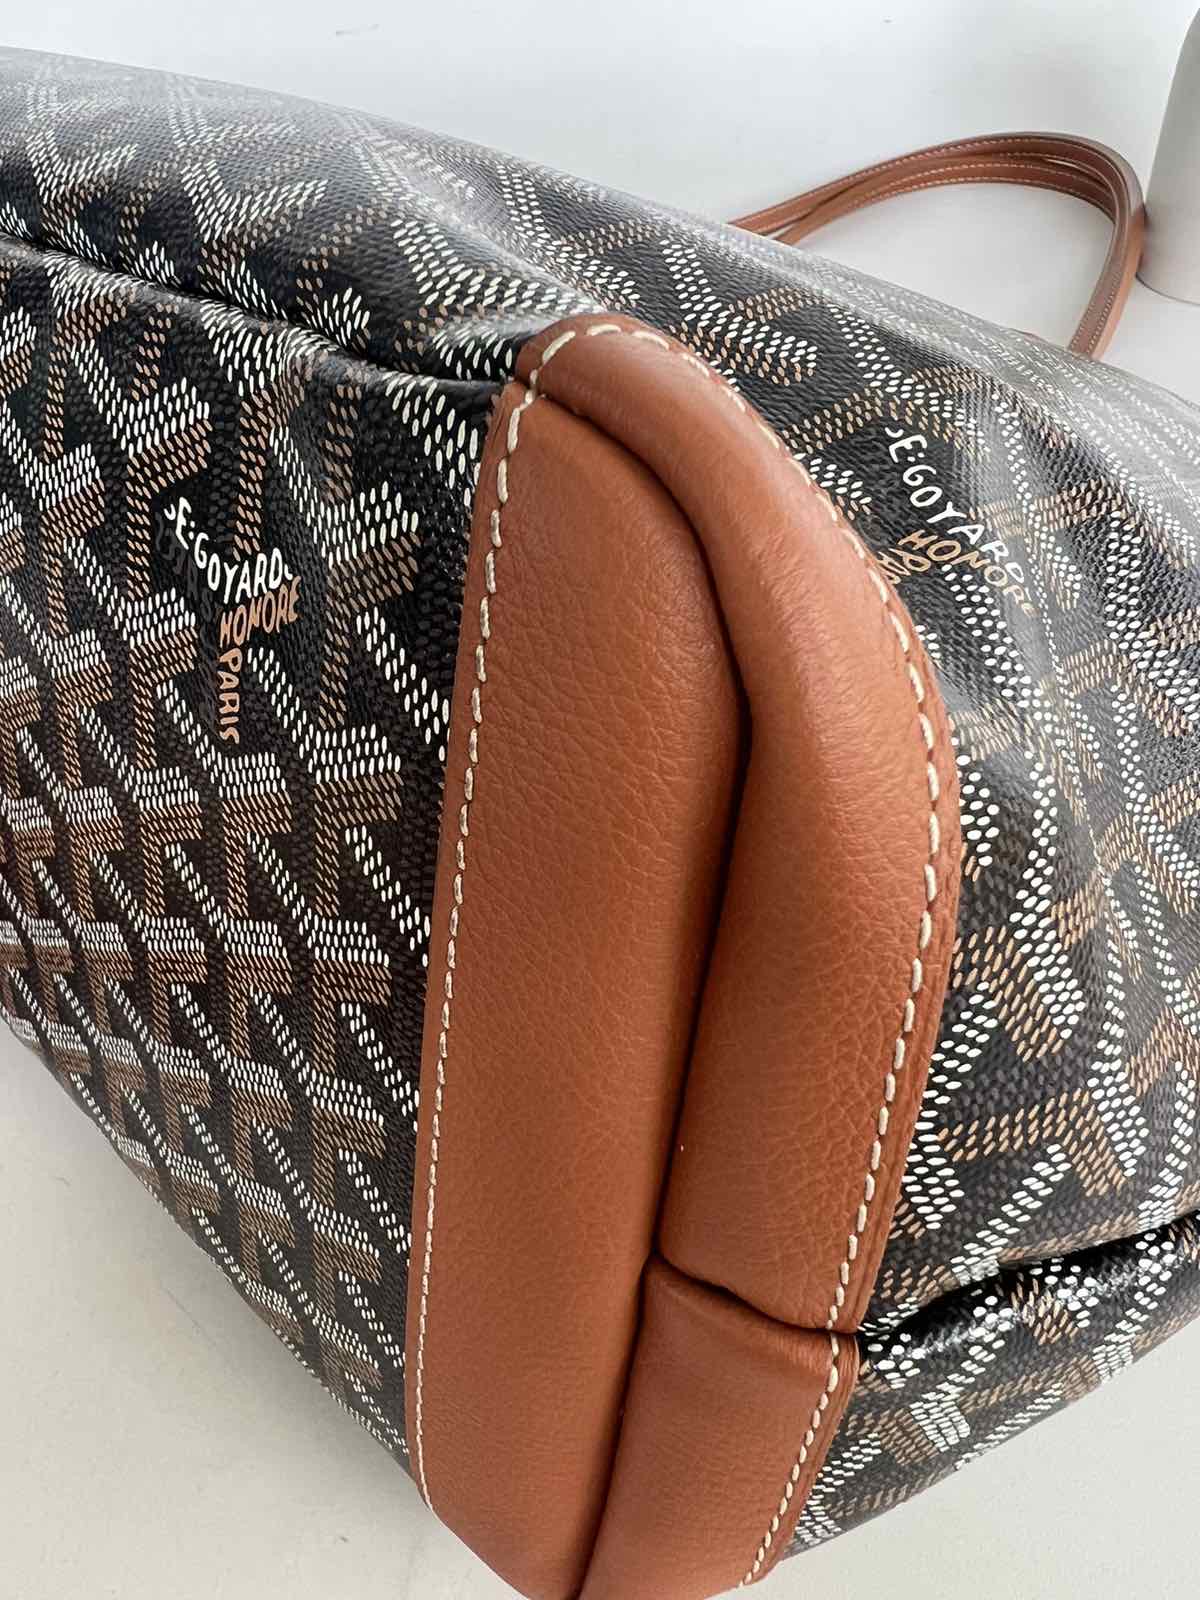 Another Special request - Goyard 'Artois MM Bag' in the classic Black and  Tan Colour way. We managed to add a special personalised touch…